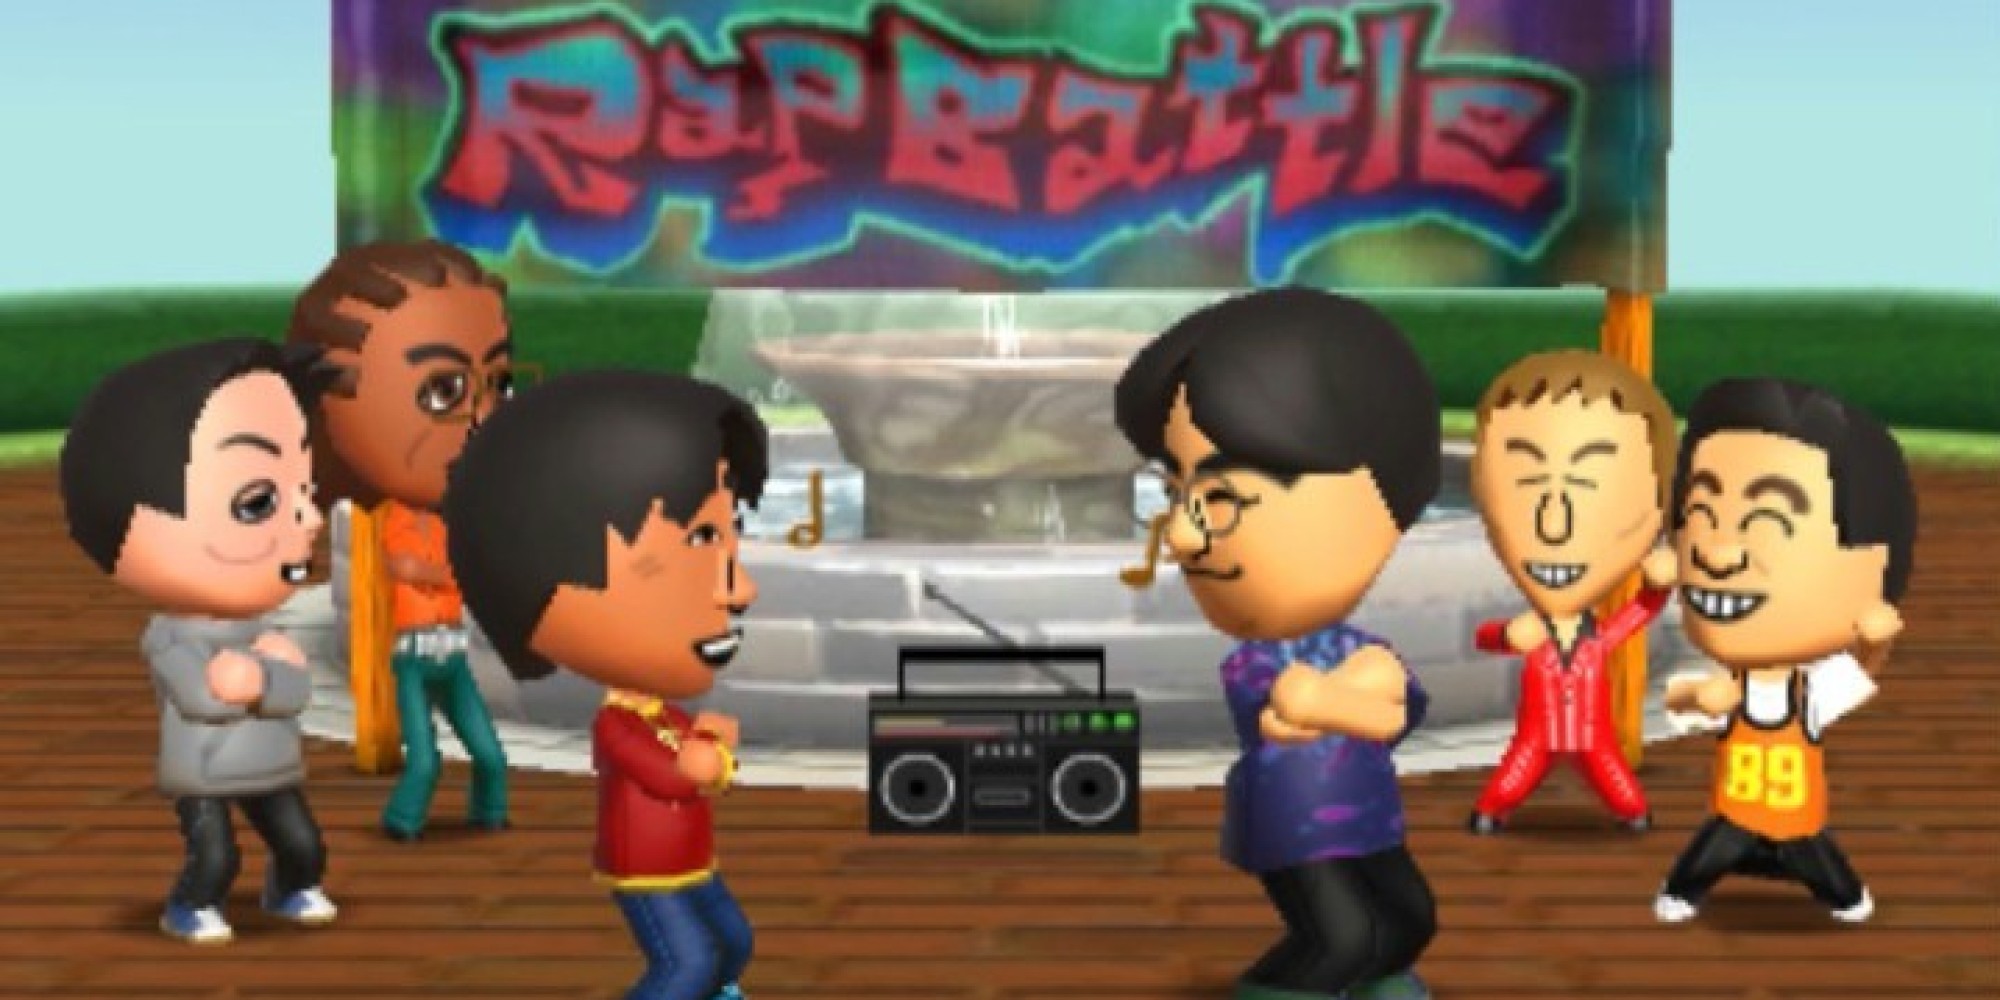 Nintendo Says No Miiquality Campaign For Gay Marriage In Tomodachi Life Video Game Denied